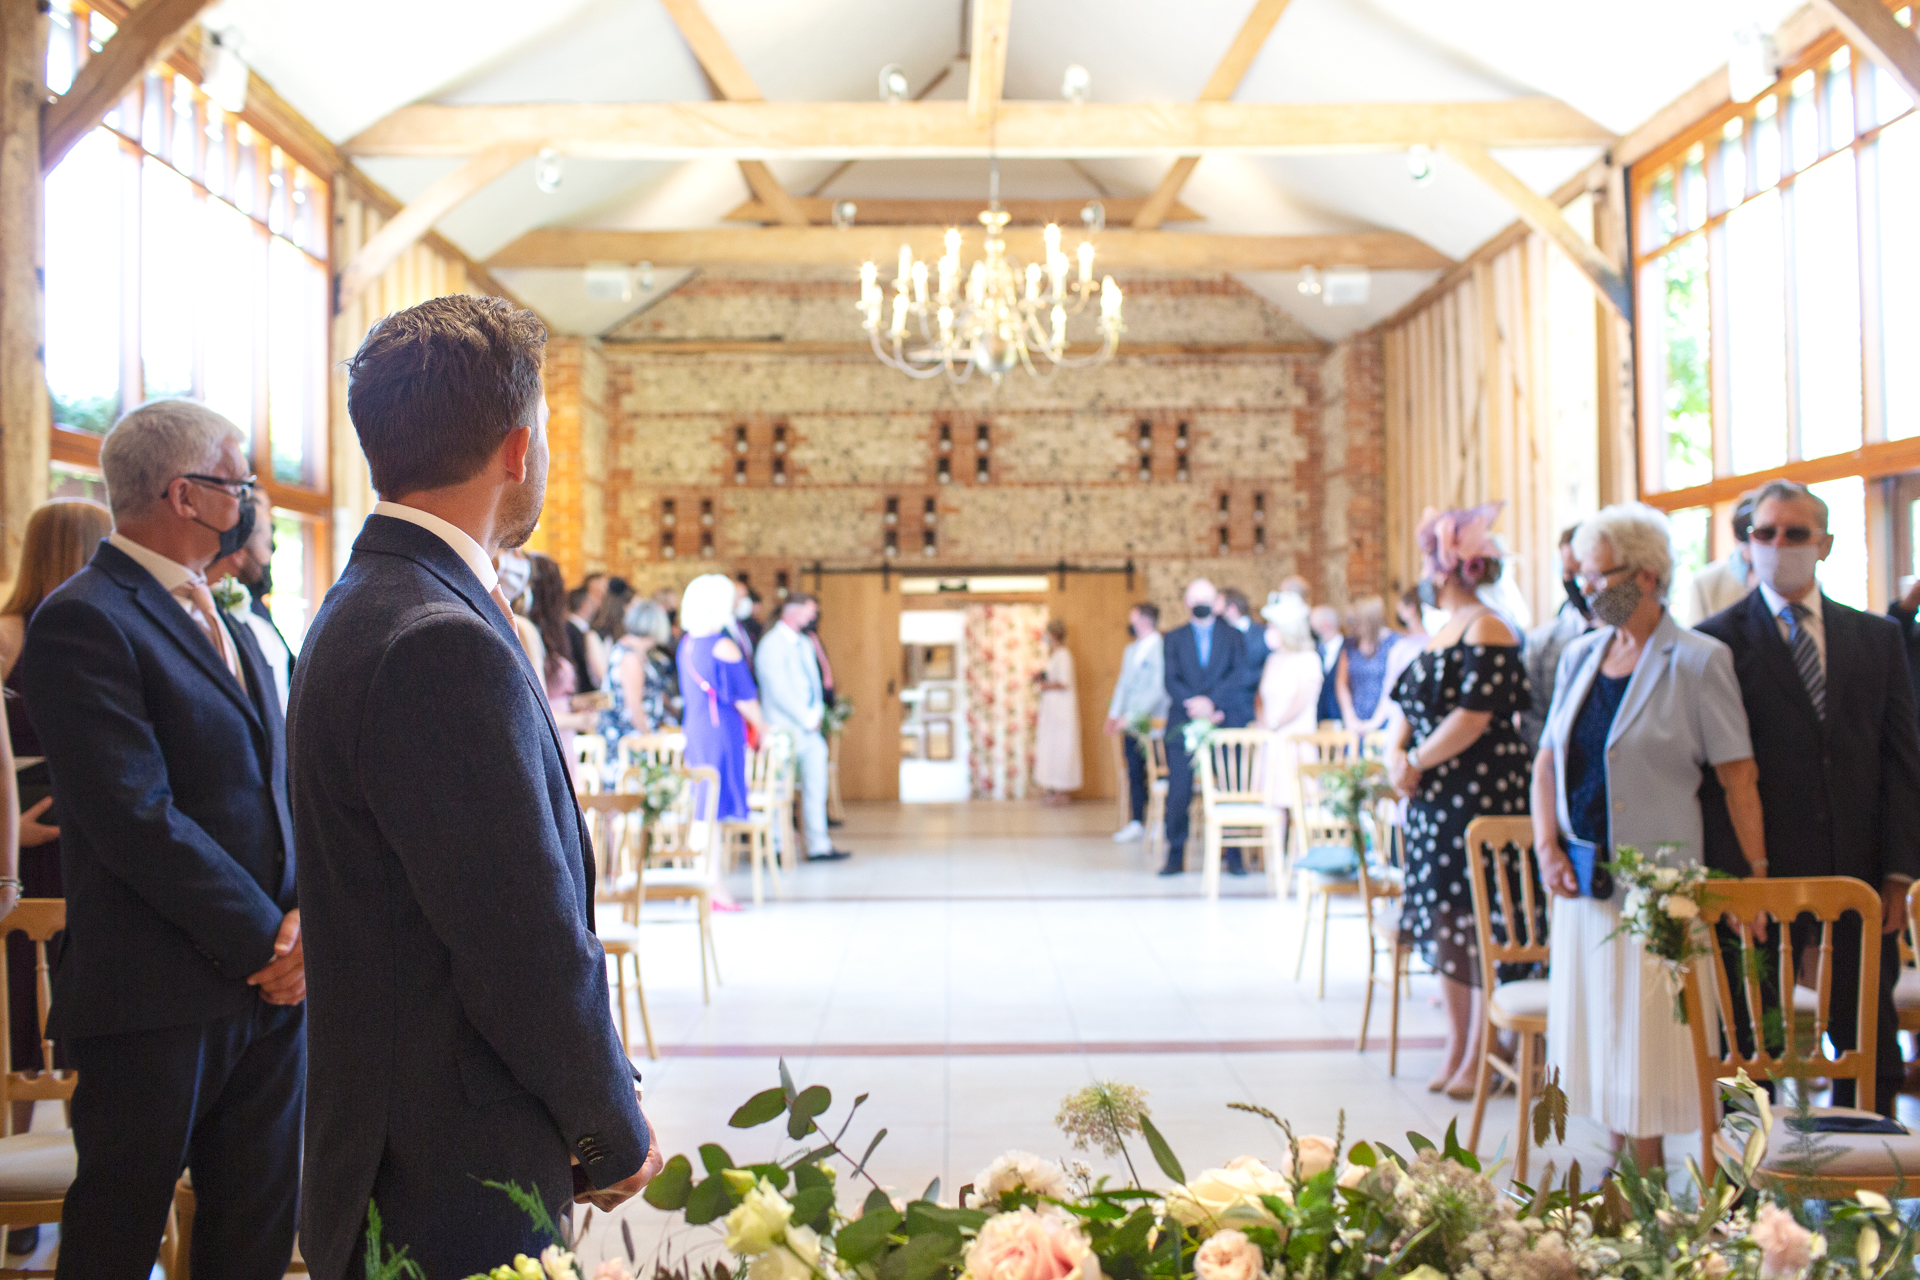 Modern & romantic wedding photography at Upwaltham Barns in Chichester